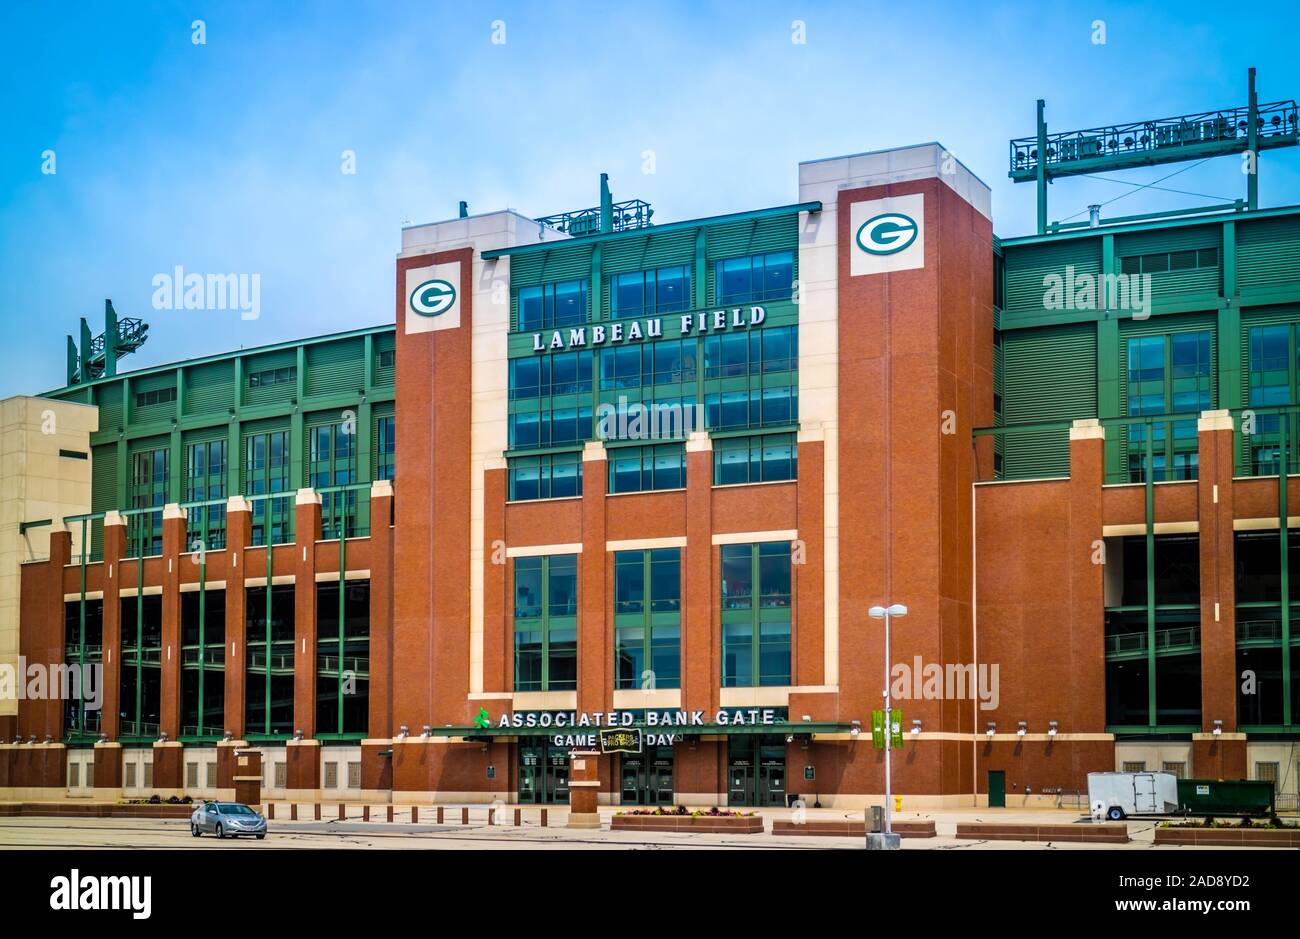 An outdoor football arena in Green Bay, Wisconsin Stock Photo